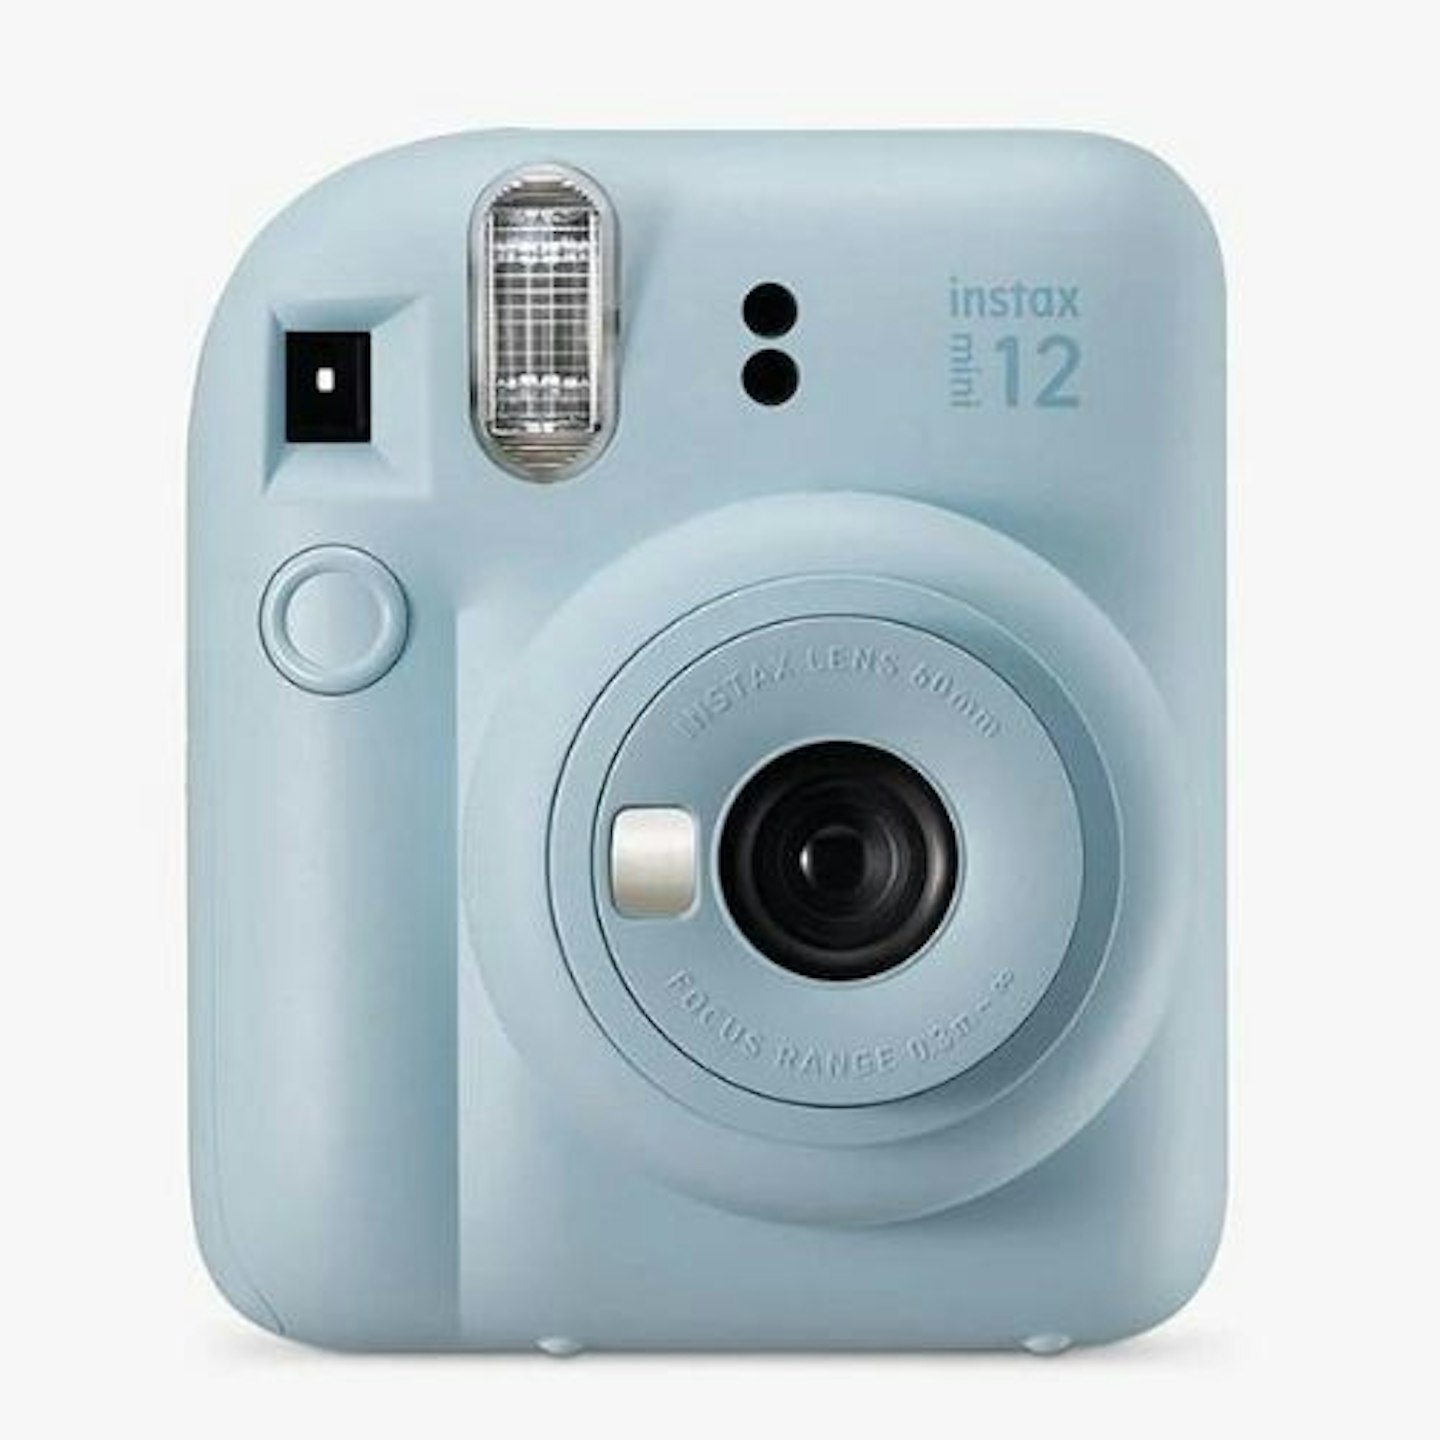 First Father's Day Gifts: Fujifilm Instax Mini 12 Instant Camera